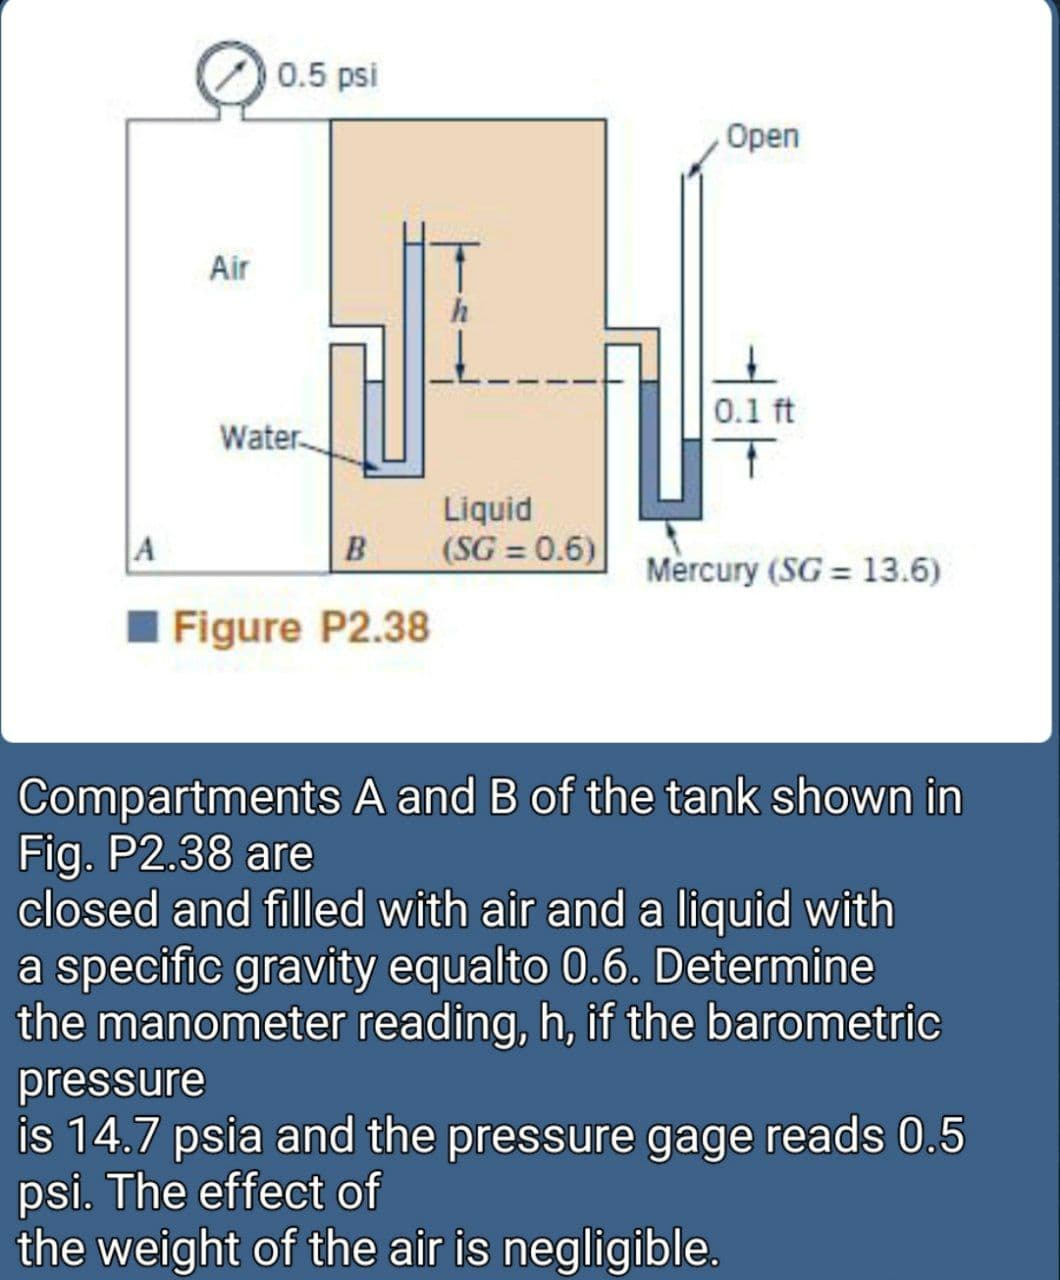 0.5 psi
Open
Air
0.1 ft
Water.
Liquid
(SG = 0.6)
B
Mèrcury (SG = 13.6)
Figure P2.38
Compartments A and B of the tank shown in
Fig. P2.38 are
closed and filled with air and a liquid with
a specific gravity equalto 0.6. Determine
the manometer reading, h, if the barometric
pressure
is 14.7 psia and the pressure gage reads 0.5
psi. The effect of
the weight of the air is negligible.
